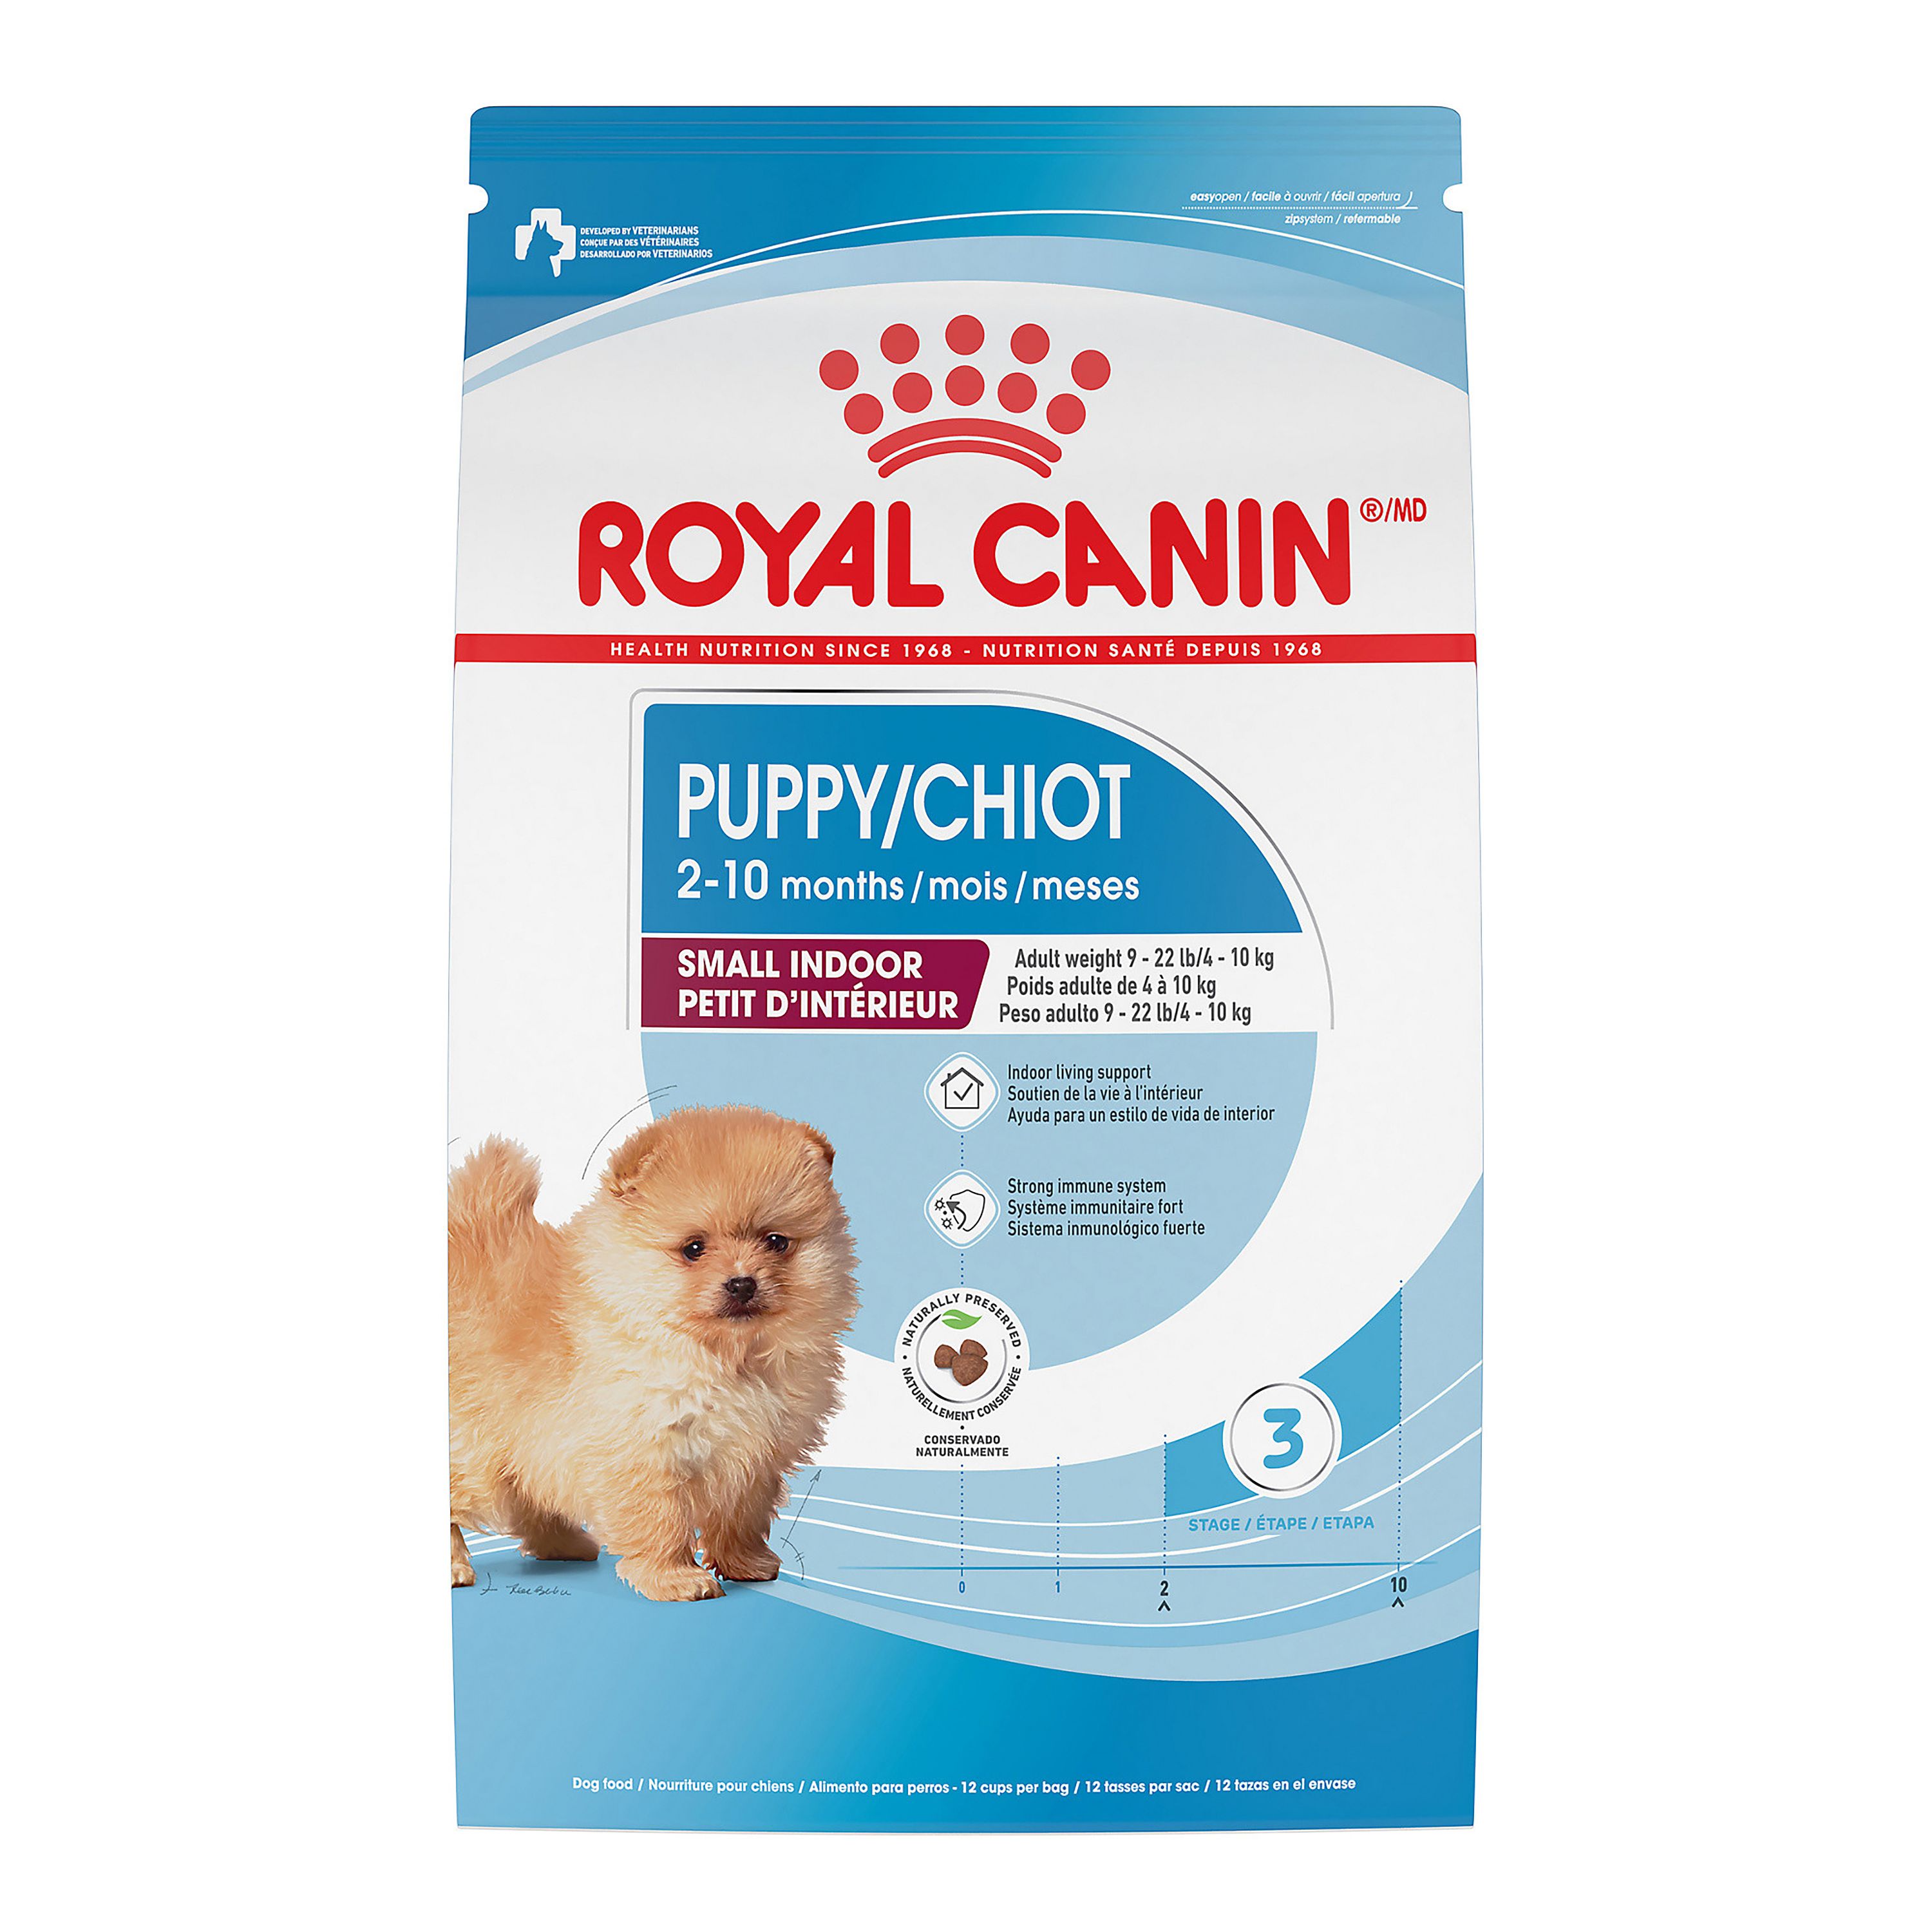 Royal Canin Lifestyle Health Nutrition Indoor Life Small Puppy